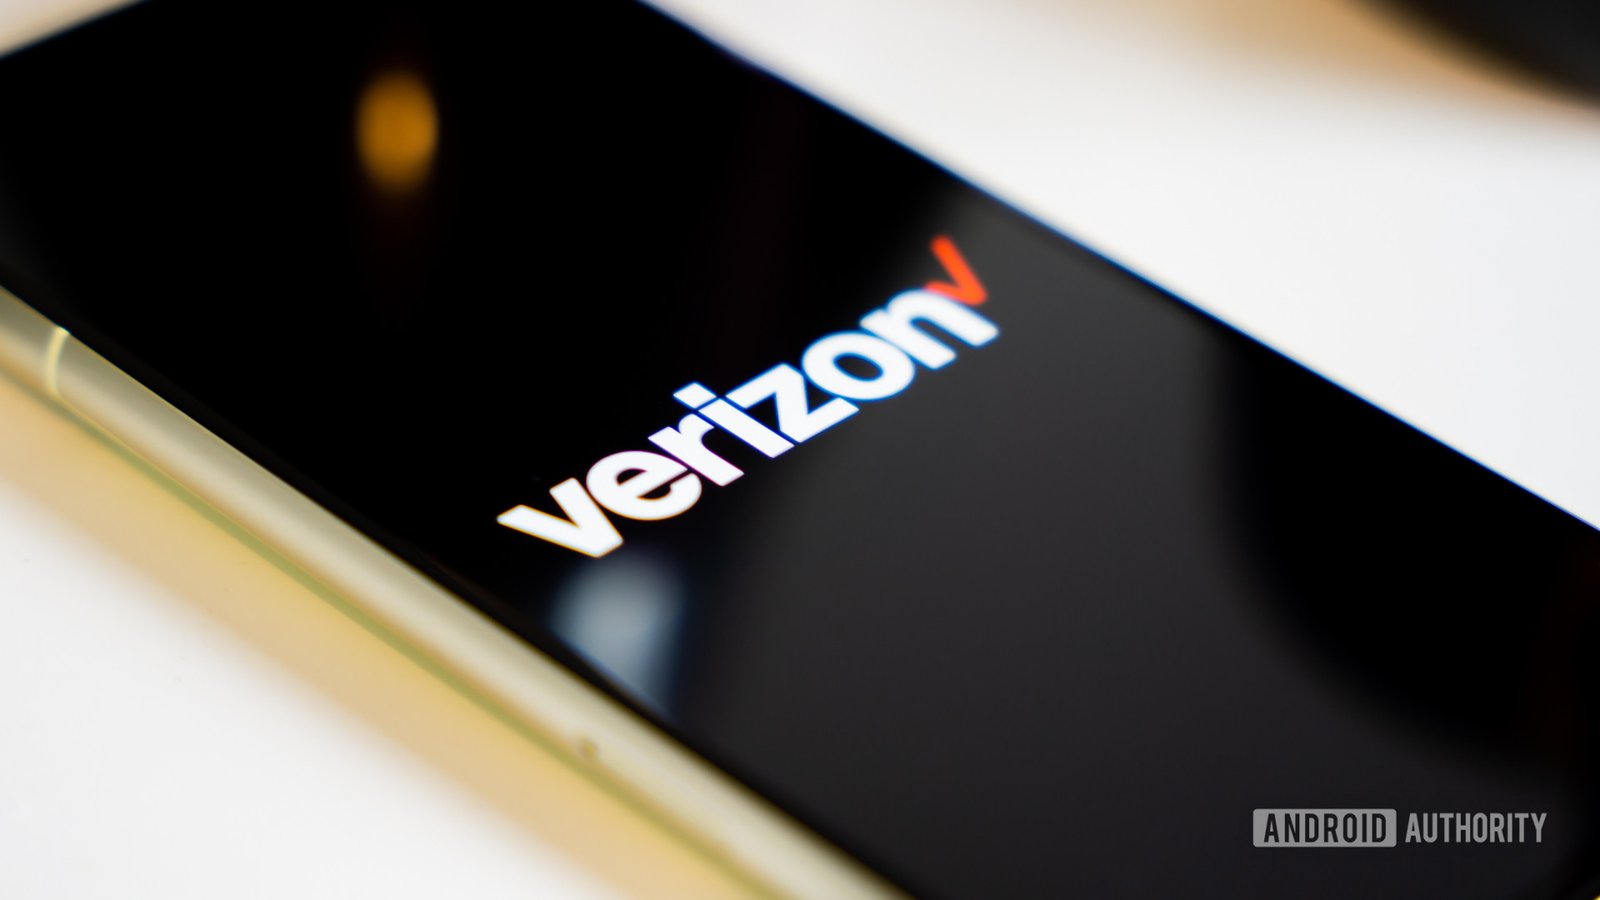 Older Verizon unlimited plans are getting a $4 per line per month price hike